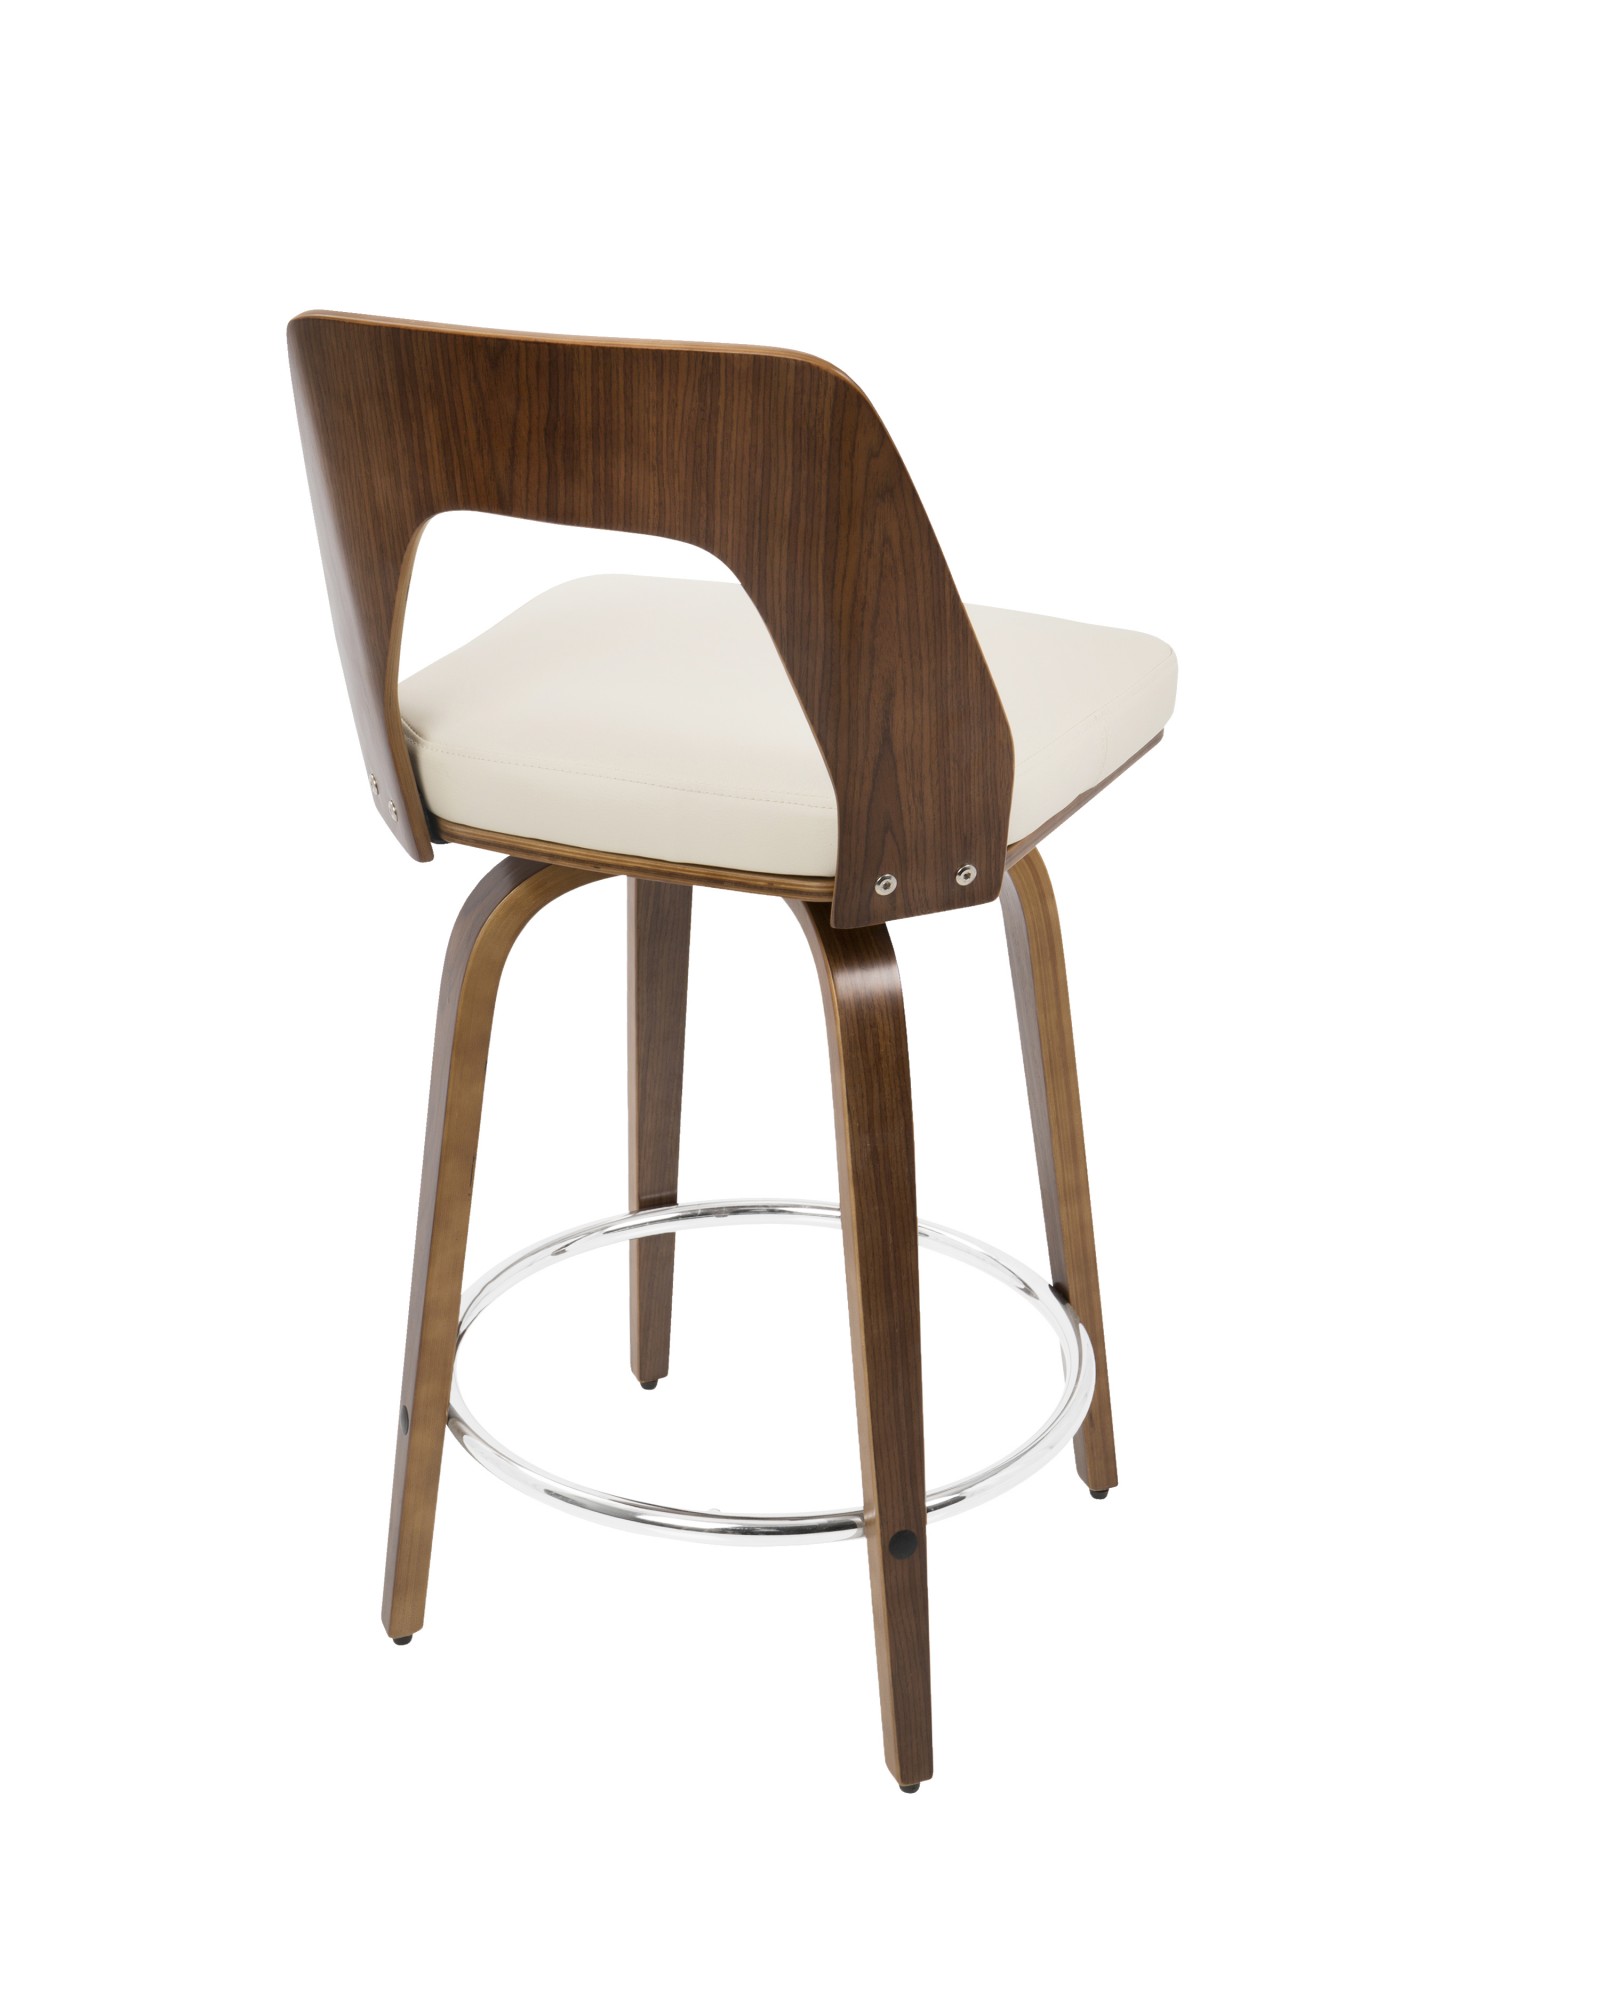 Trilogy Mid-Century Modern Counter Stool in Walnut and Cream Faux Leather